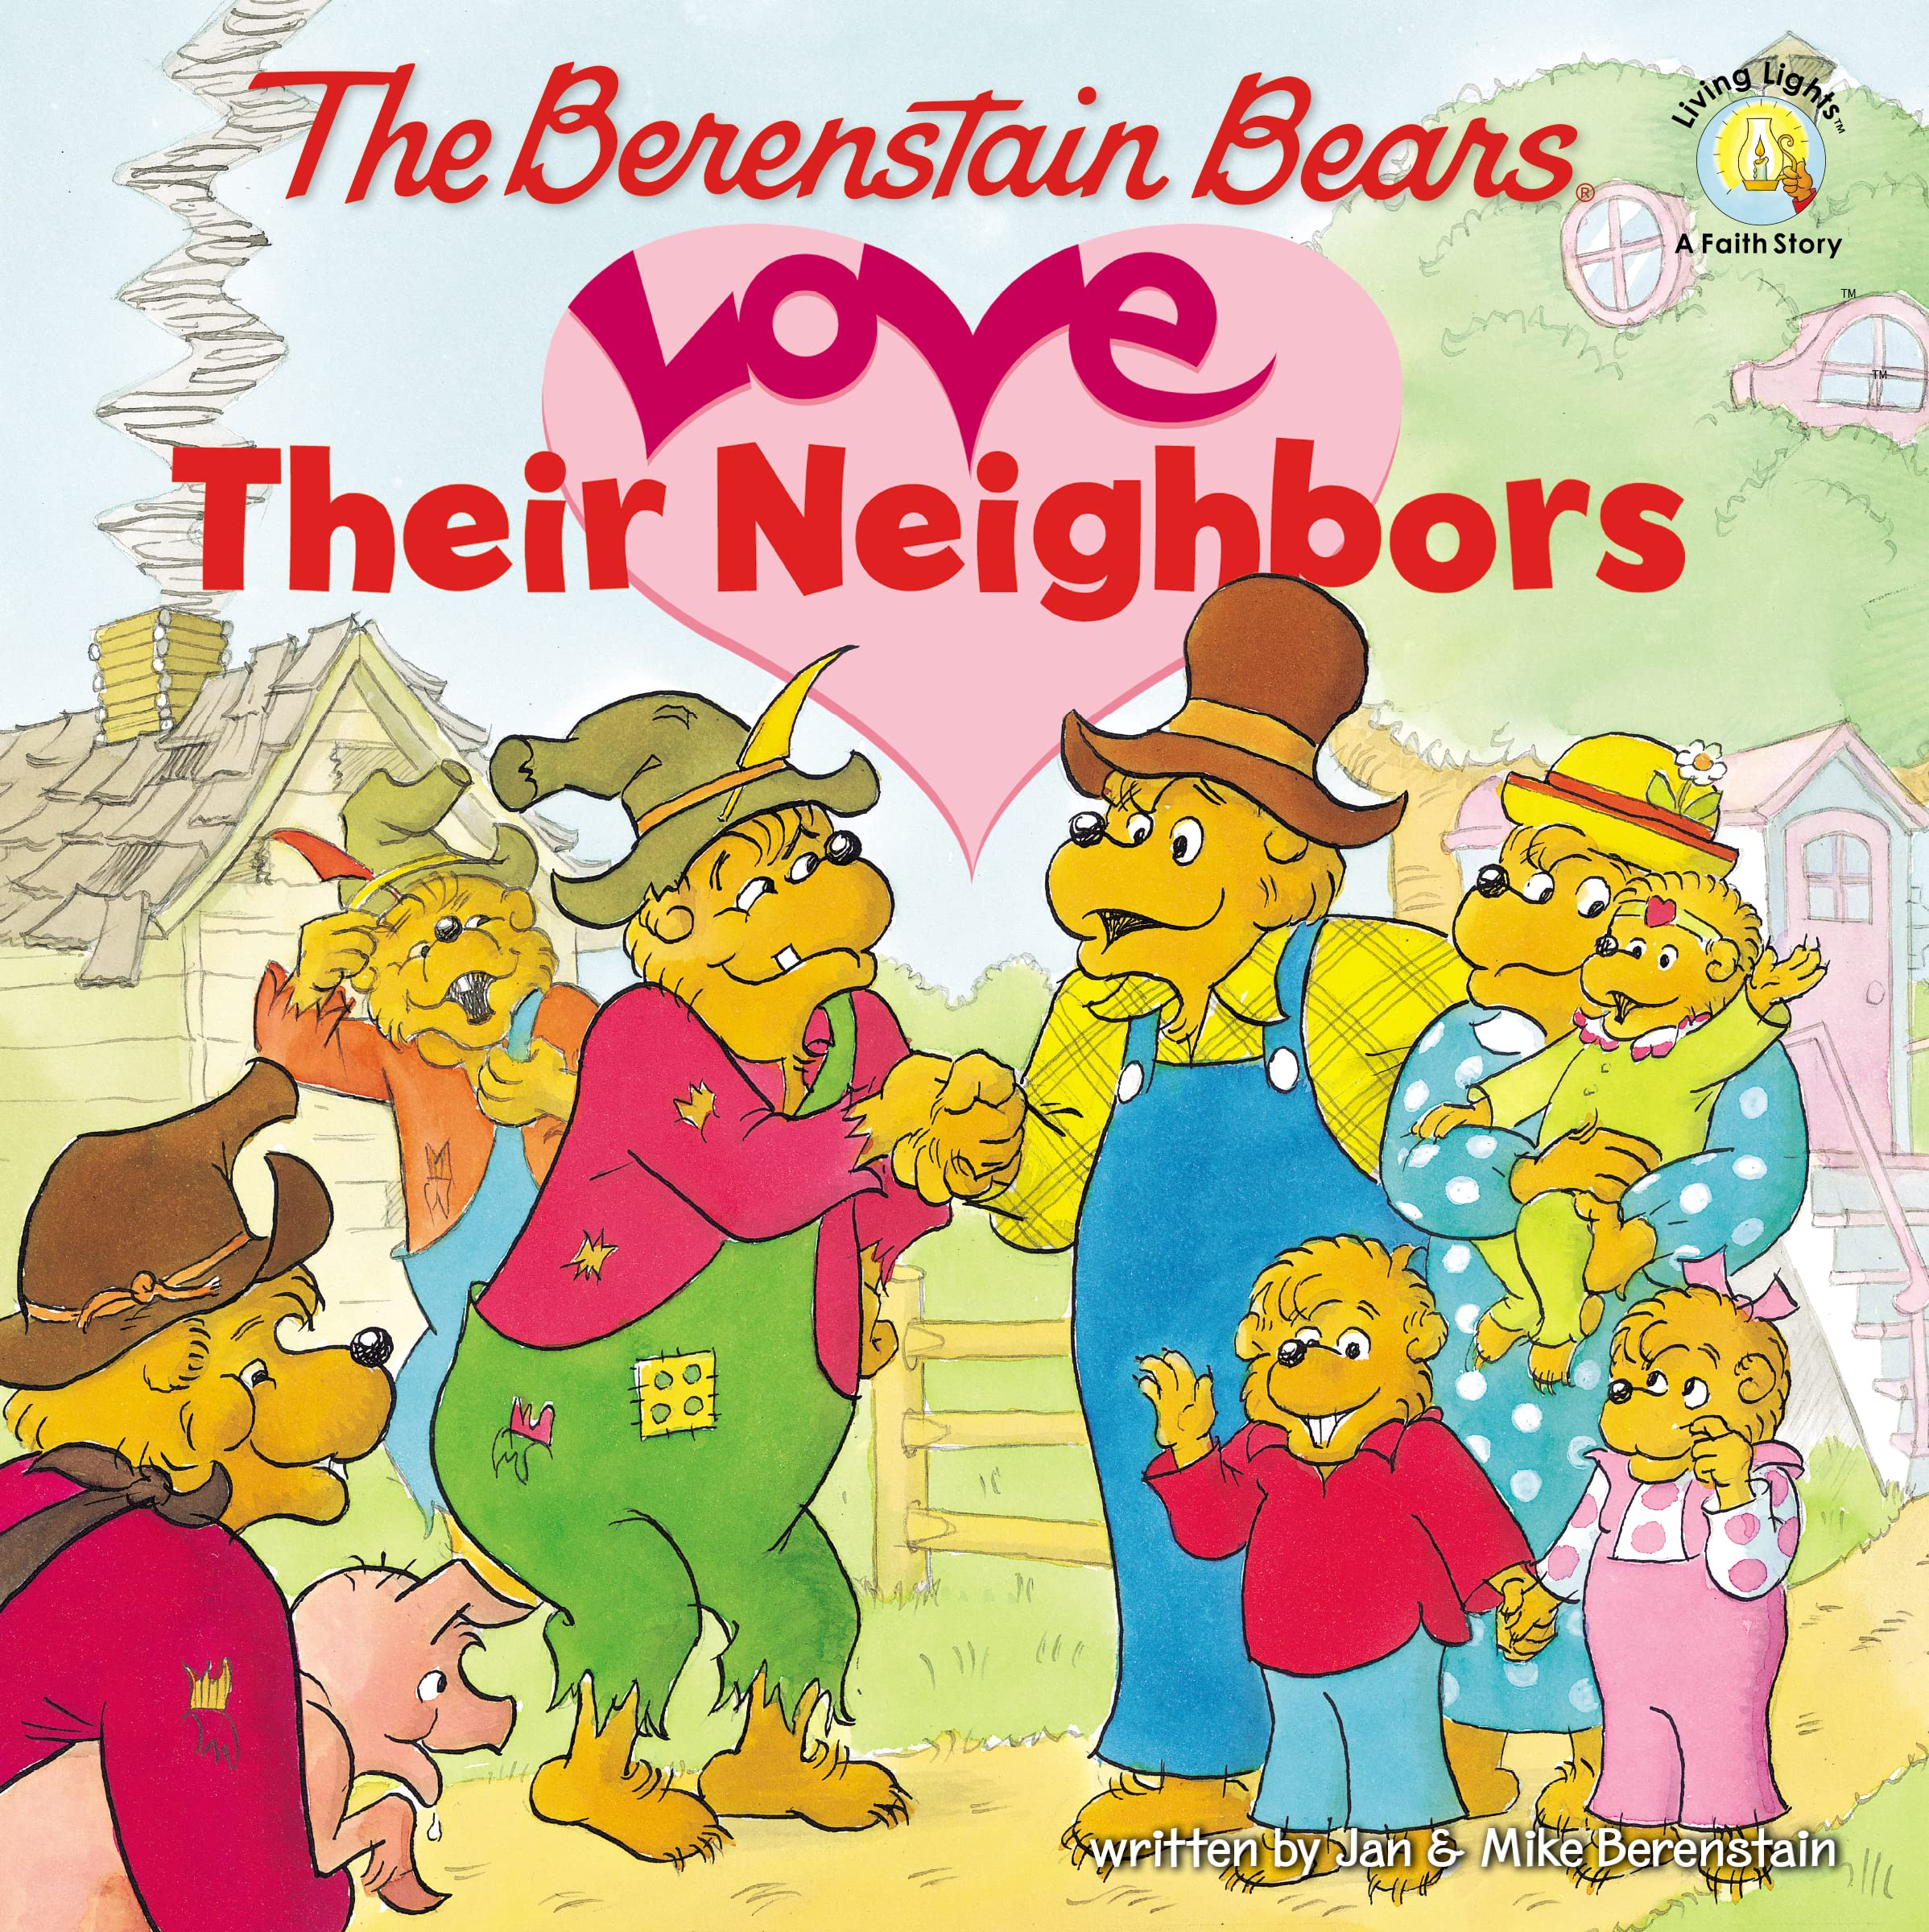 IMG : The Berenstain Bears Love their Neighbours